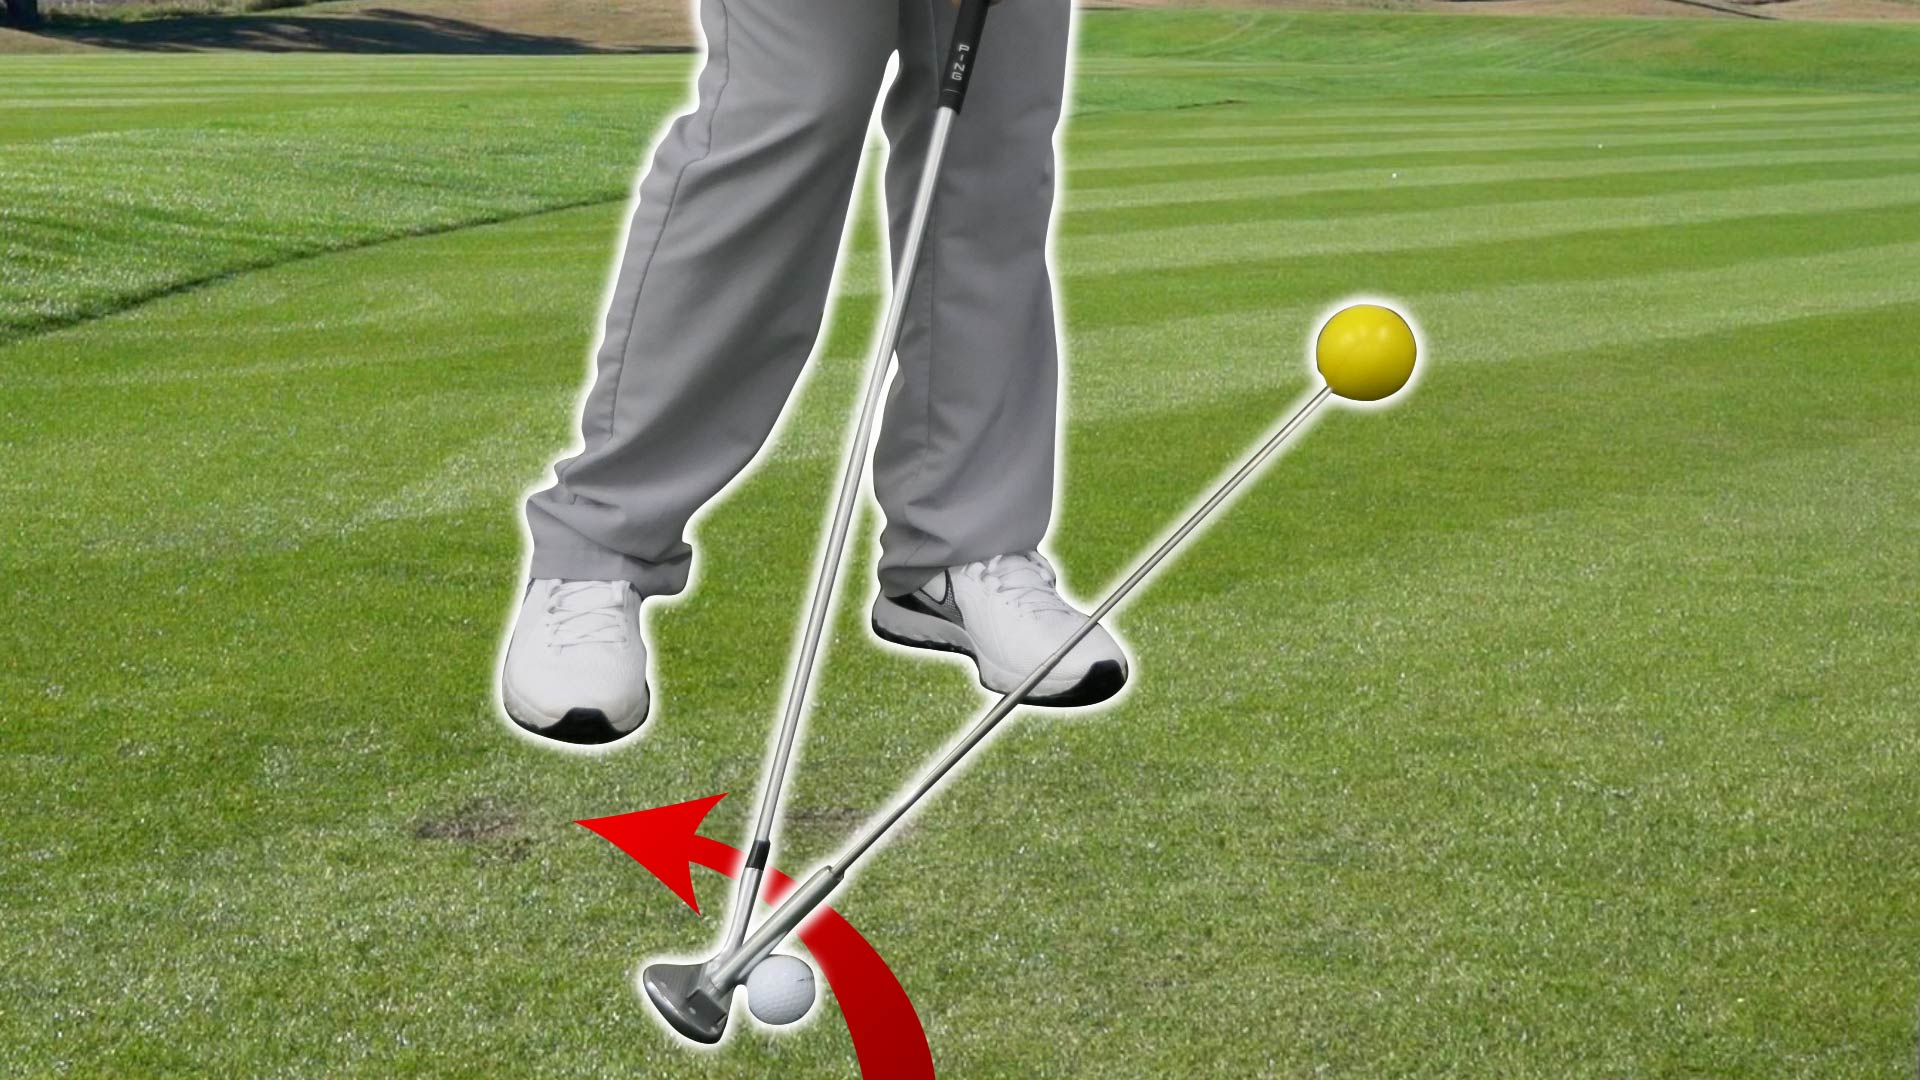 How To Get Backspin On Pitch Shots Like The Pros • Top Speed Golf